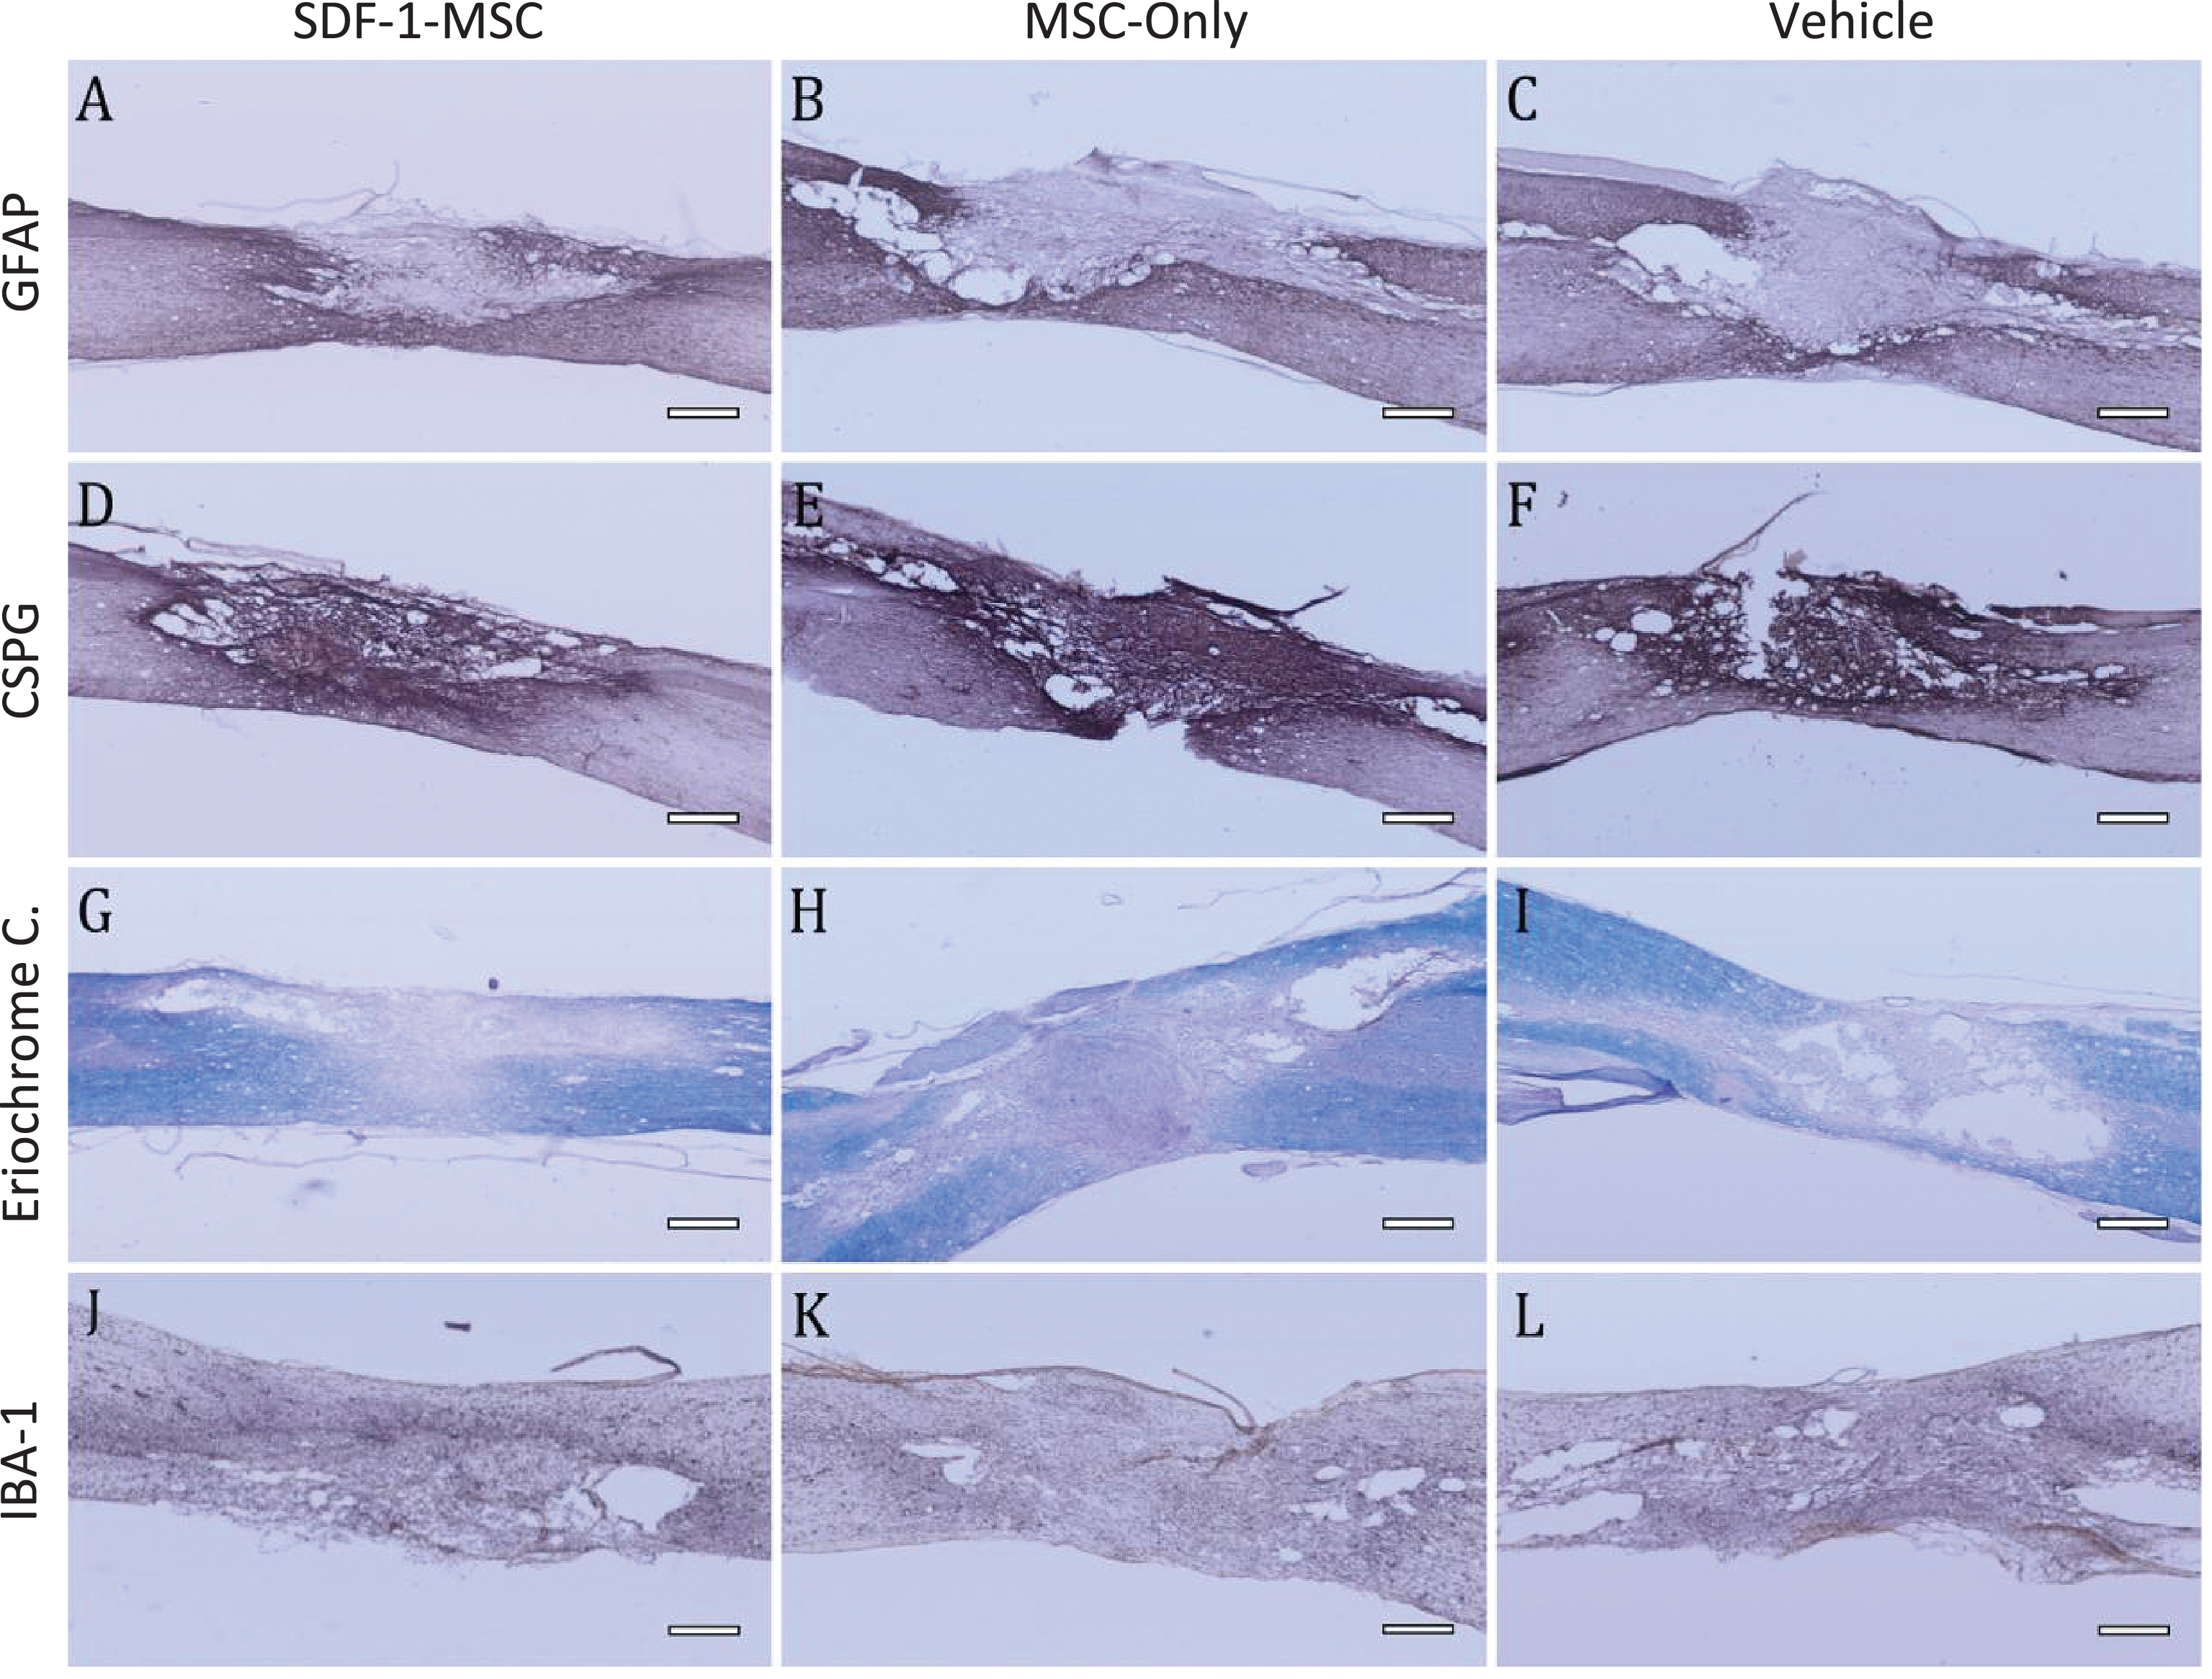 Immunohistochemistry GFAP, CSPG, Eriochrome Cyanine, IBA-1. (A-I) Immunohistology was performed to analyze major histopathological outcomes for astrocytes as measured by GFAP (A-C), for proteoglycans as measured by CSPG (D-F), for white matter pathology as measured by eriochrome cyanine staining (G-I), and for inflammation as measured by IBA-1 (J-L). No significant differences could be detected between SDF-1-MSC (A,D,G,J), MSC-only (B,E,H,K), or vehicle (C,F,I,L) groups. Areas of the lesions can be identified by clear boundaries in CSPG and GFAP labeling. Tissue within the lesion area is void of immunological labeling for GFAP, but dense in CSPG labeling. Scale bars represent 500-μm.